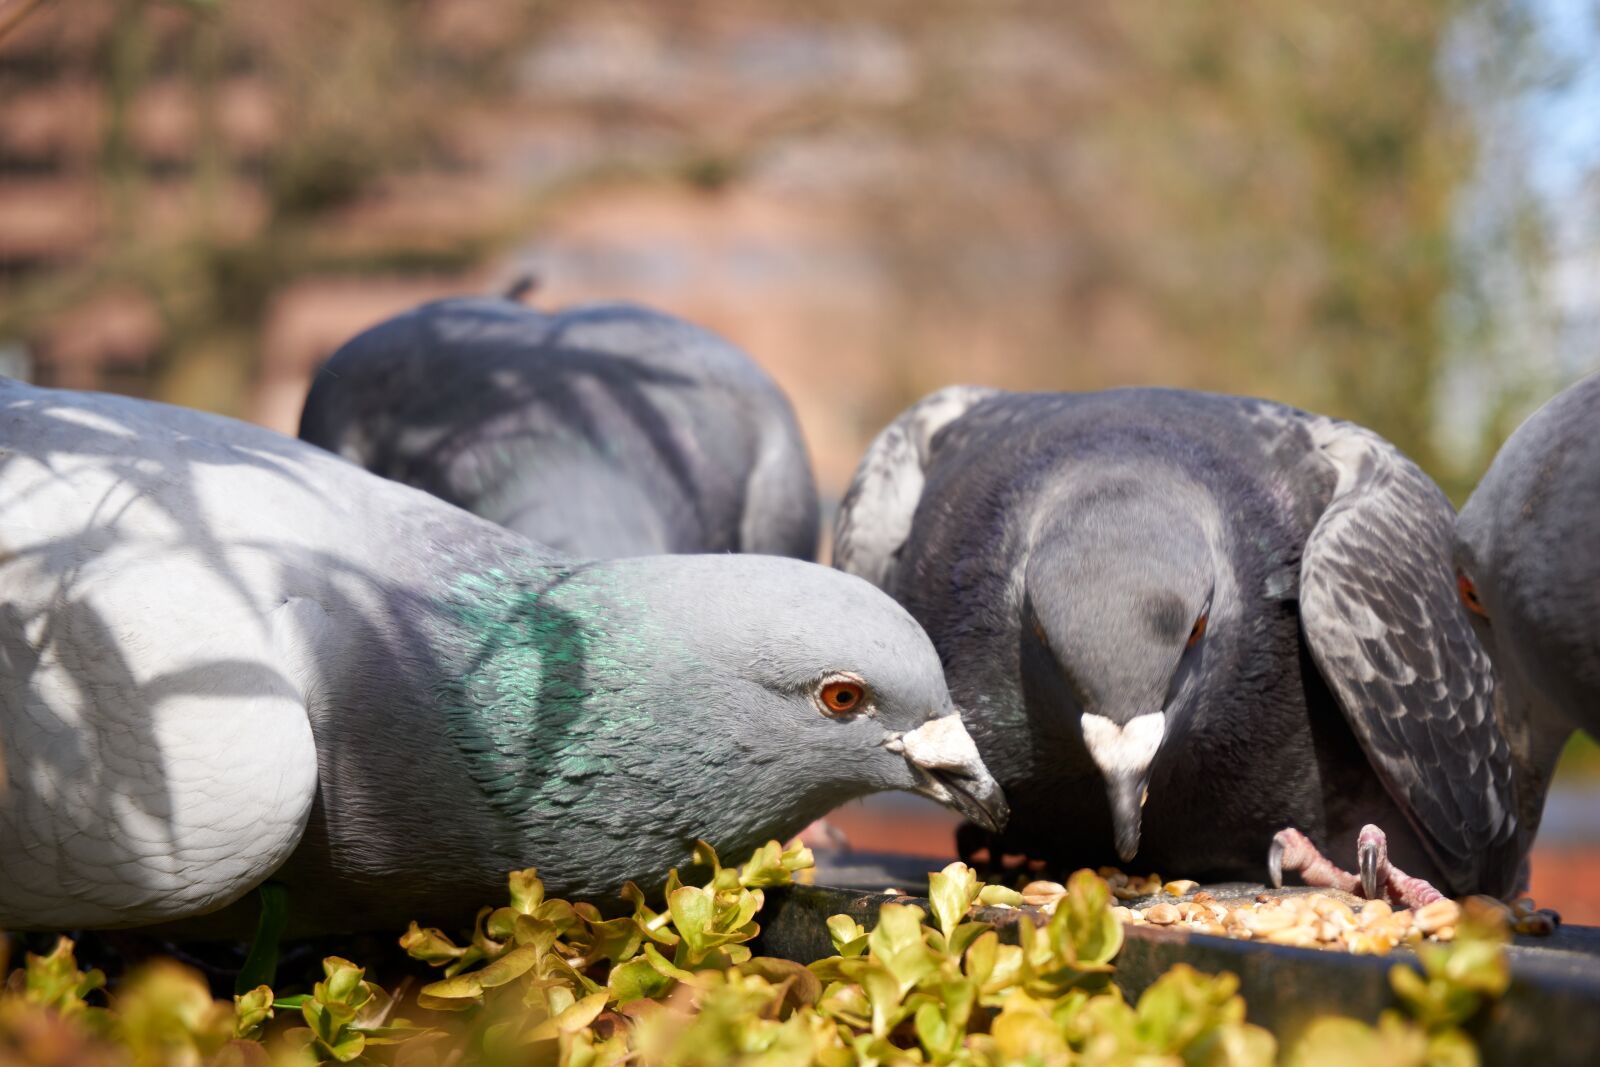 Sony a6000 + Sony E PZ 16-50 mm F3.5-5.6 OSS (SELP1650) sample photo. Pigeons, eating, seeds photography